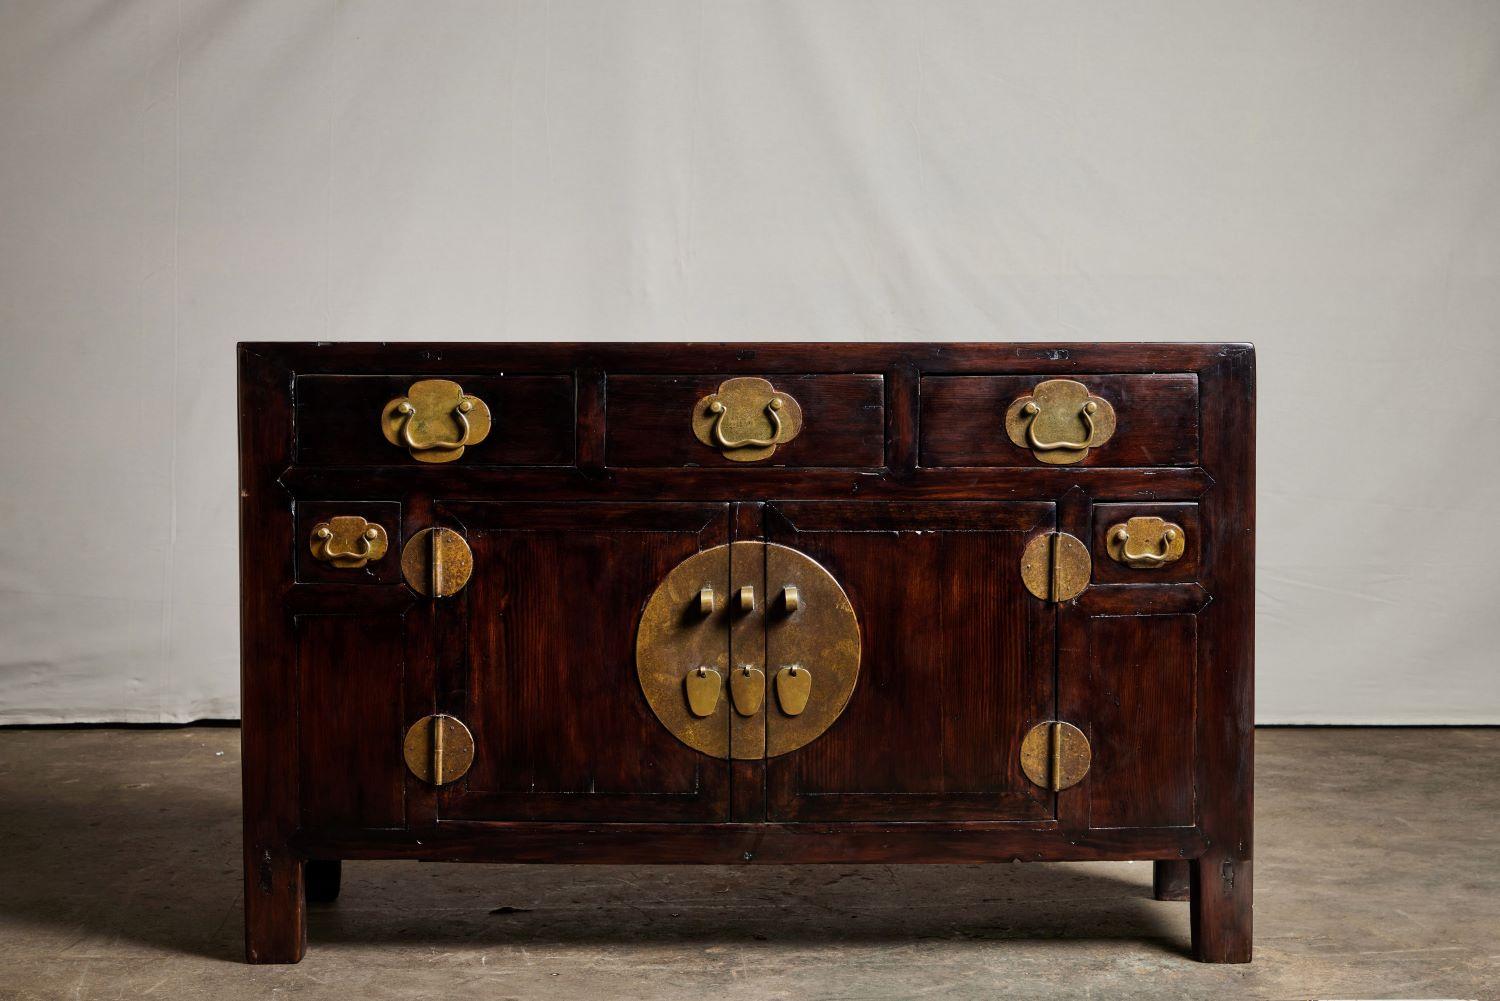 A 19th century narrow Chinese yellow pine cabinet featuring very fine grain and brass hardware. The cabinet has a set of three drawers on the upper portion with one large cabinet underneath it. The large cabinet features a brass escutcheon and the